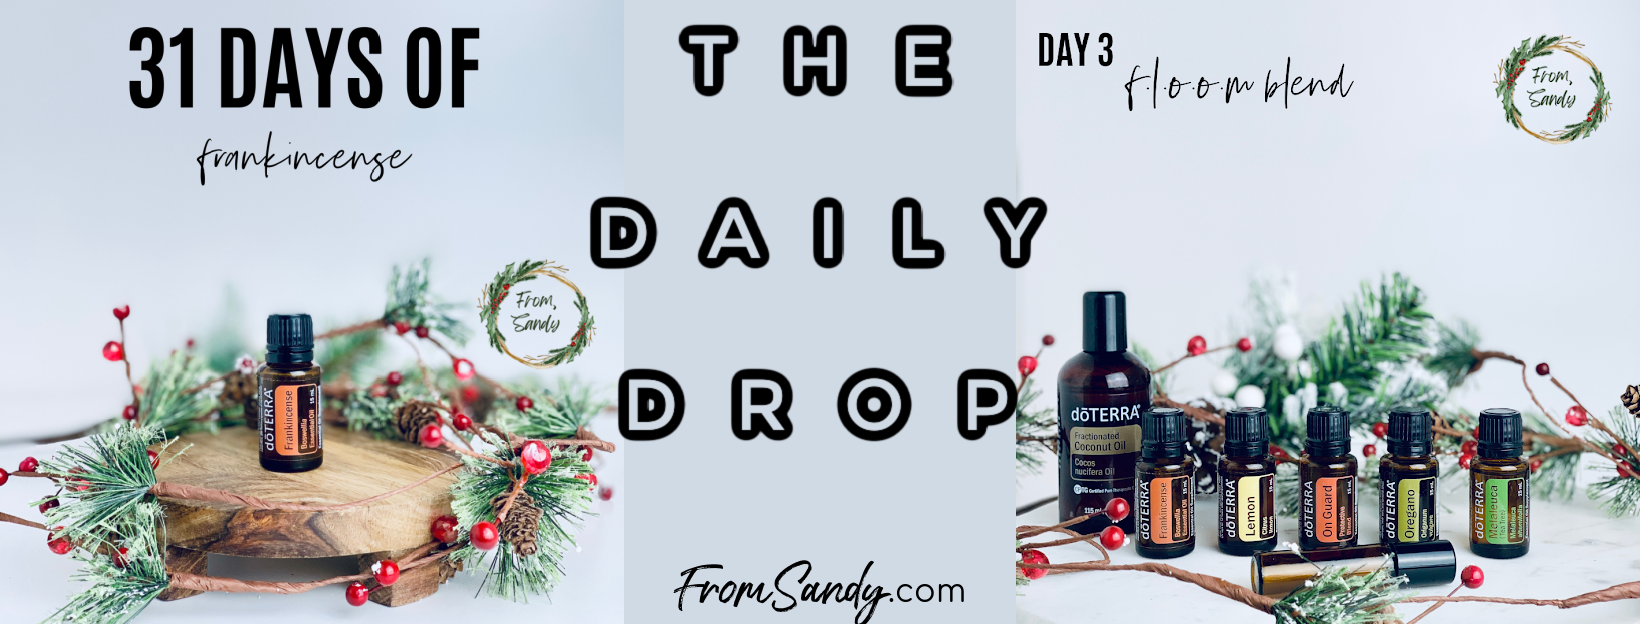 FLOOM Blend (31 Days of Frankincense: Day 3), From Sandy